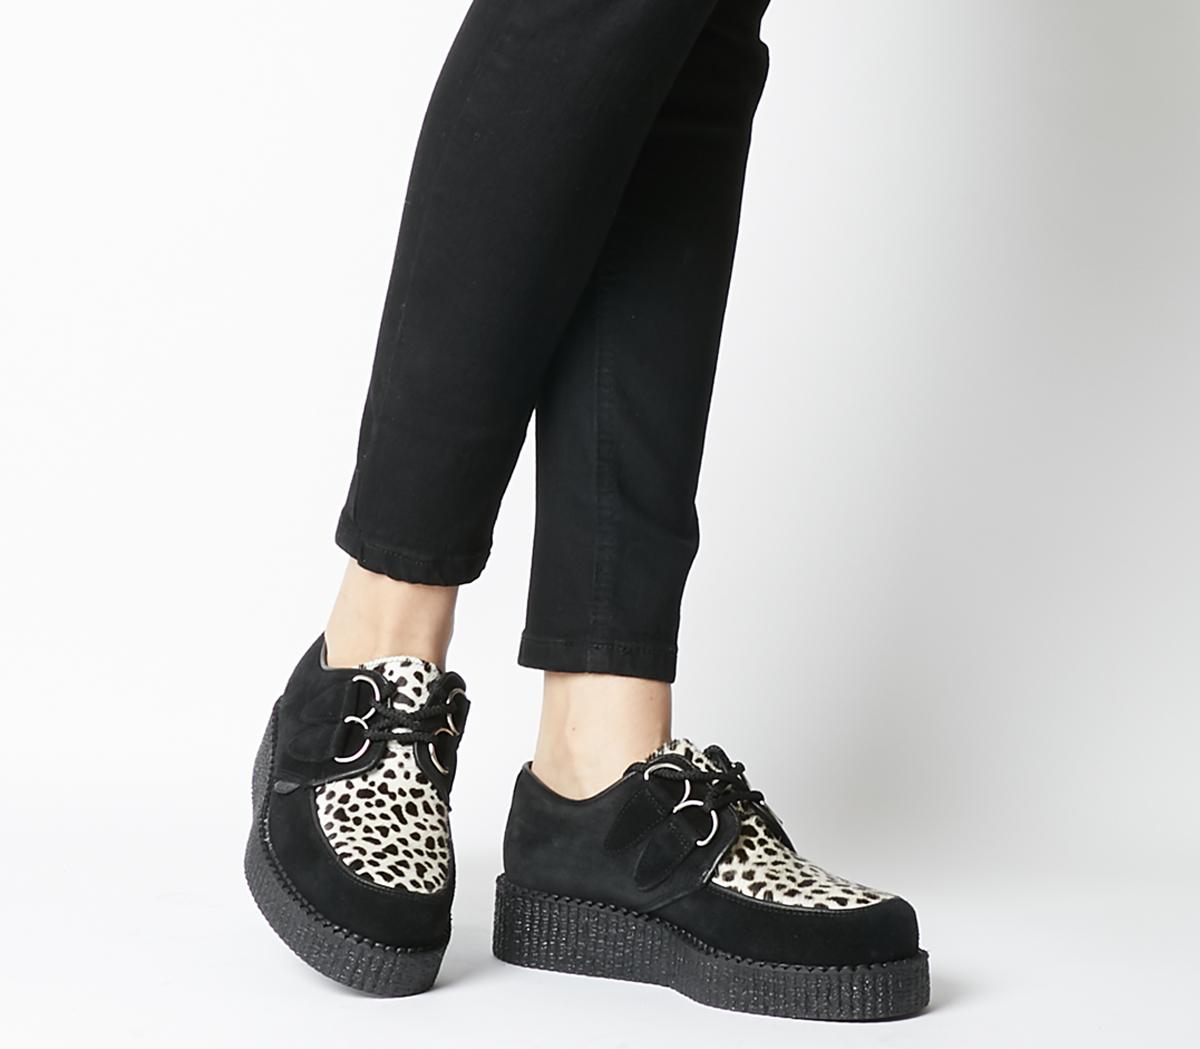 leopard creepers shoes